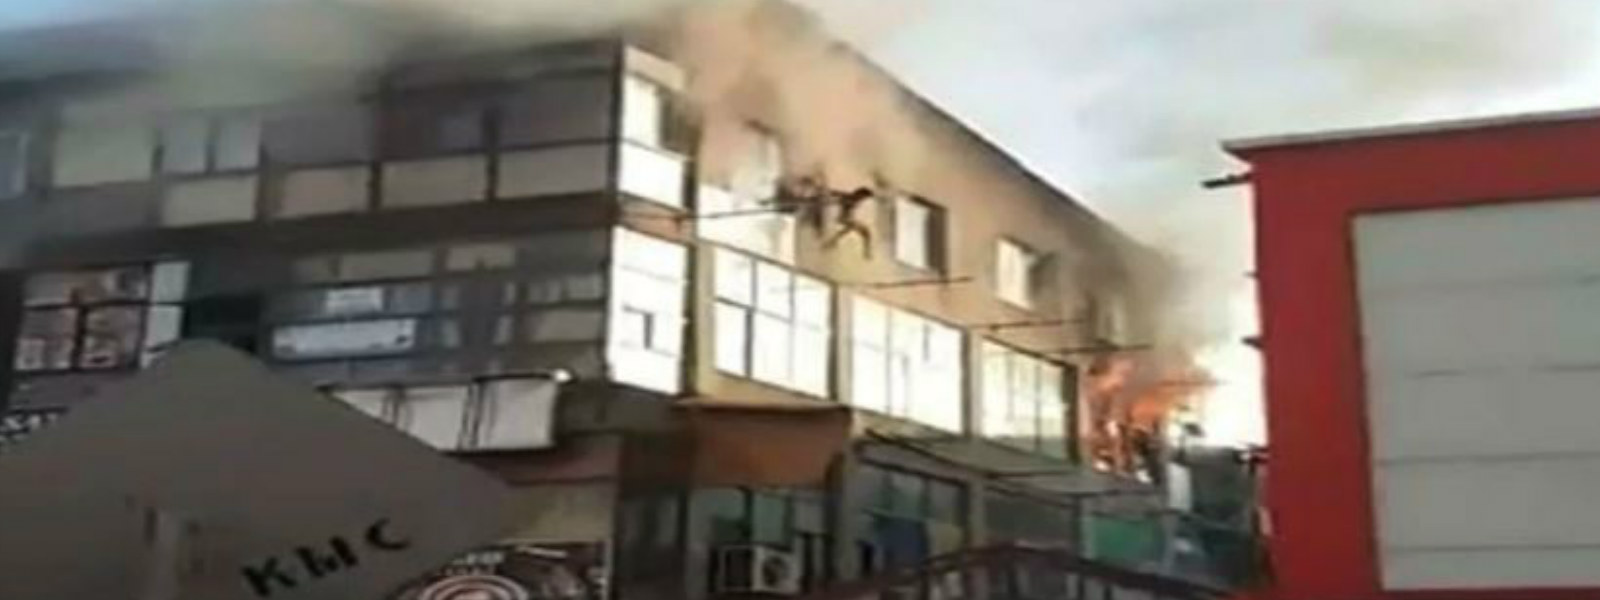 3 rescued from burning building in Kandy